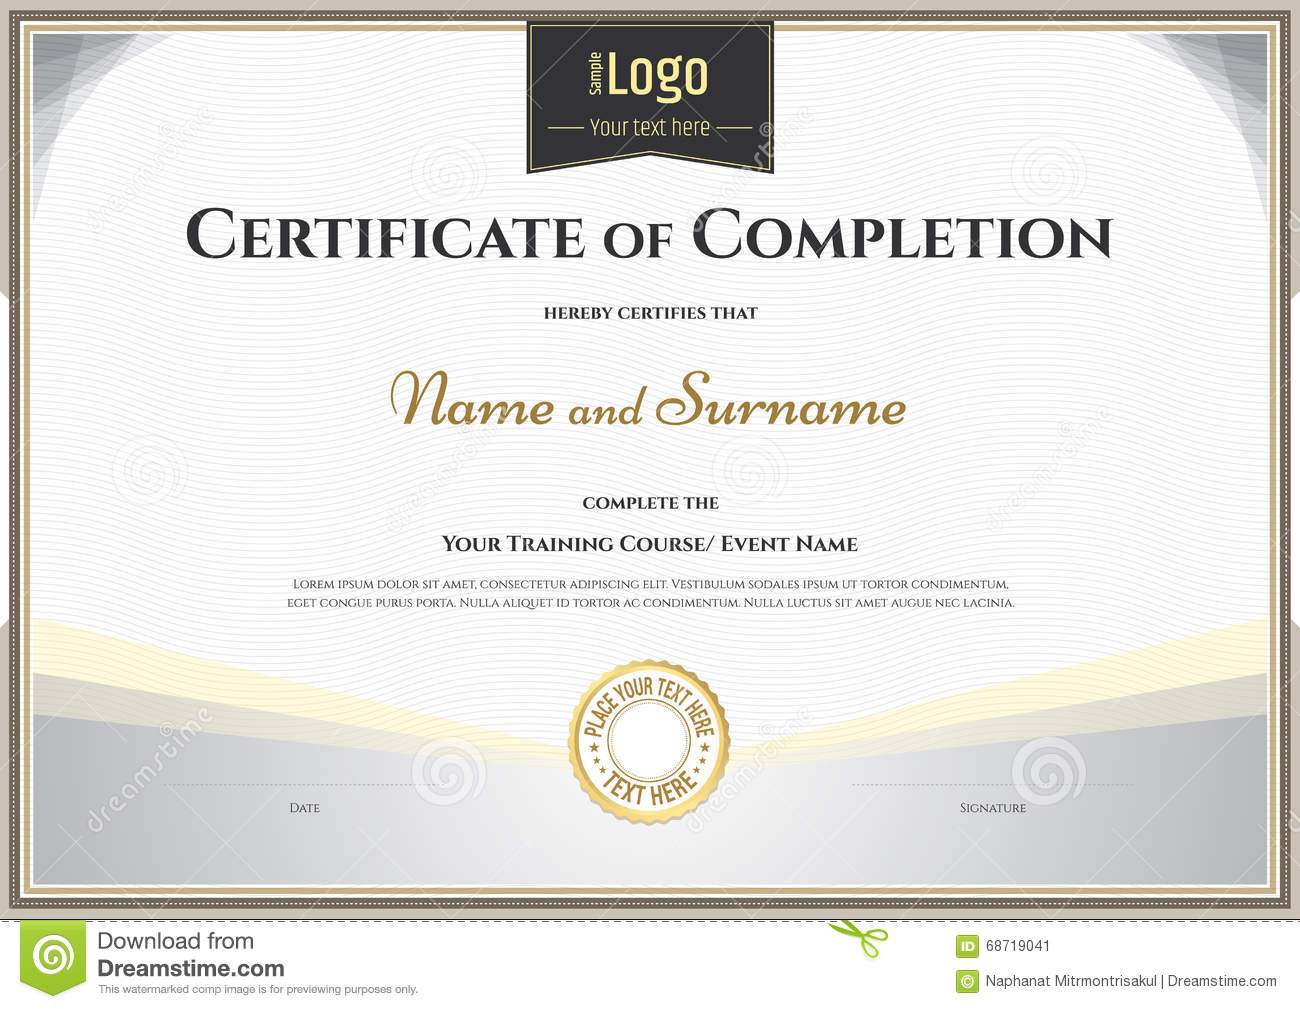 Certificate of Completion Template in Vector for Achievement  With Regard To Certification Of Completion Template